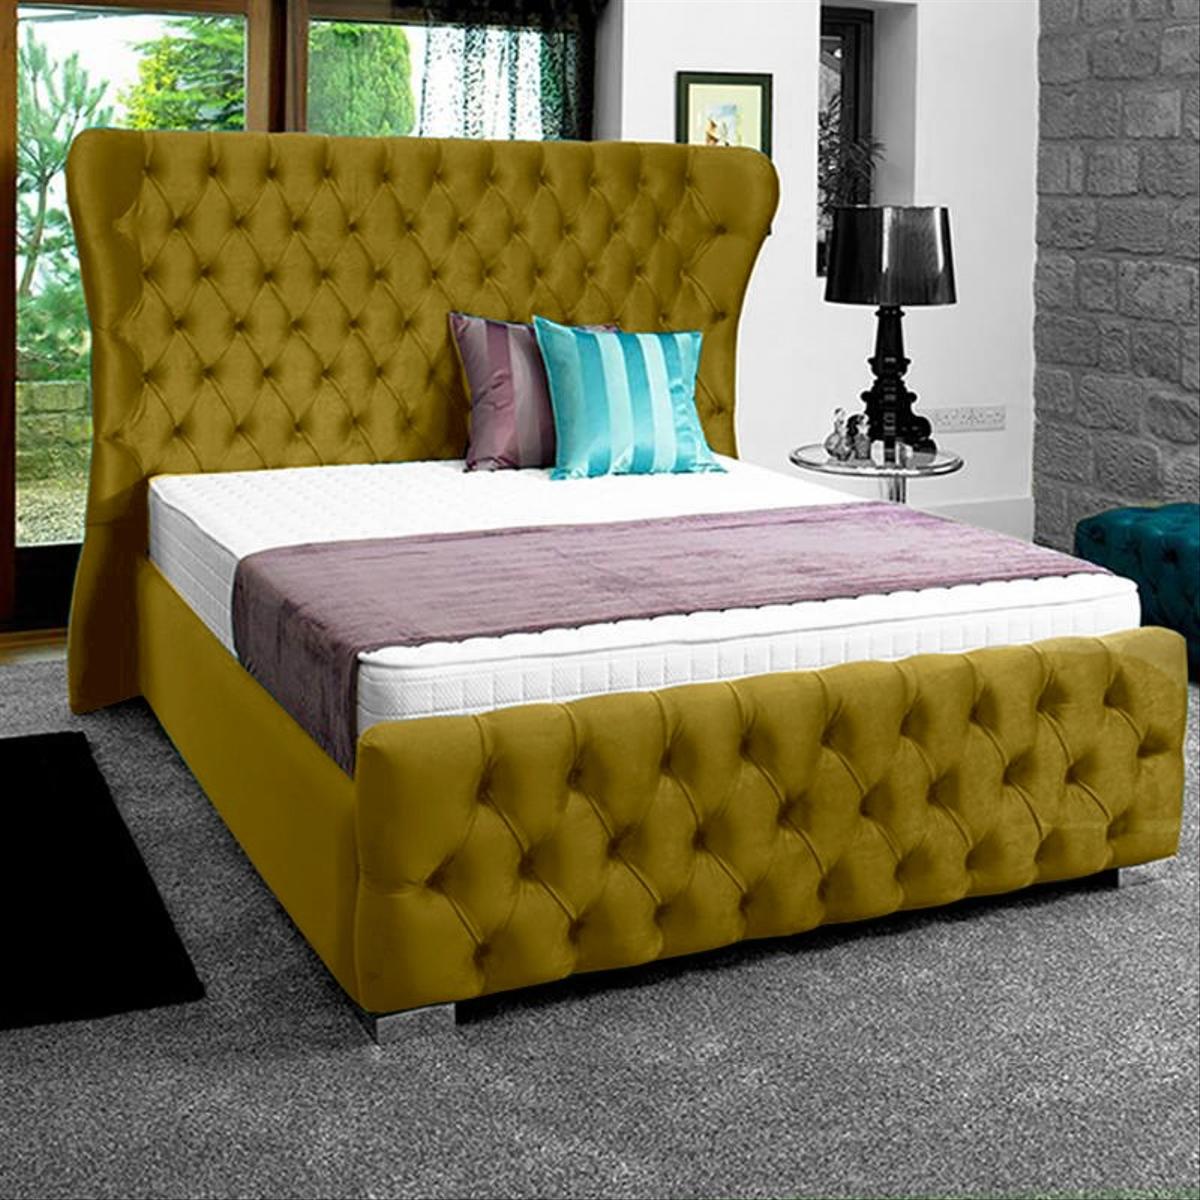 The Oxford Wingback Bedframe